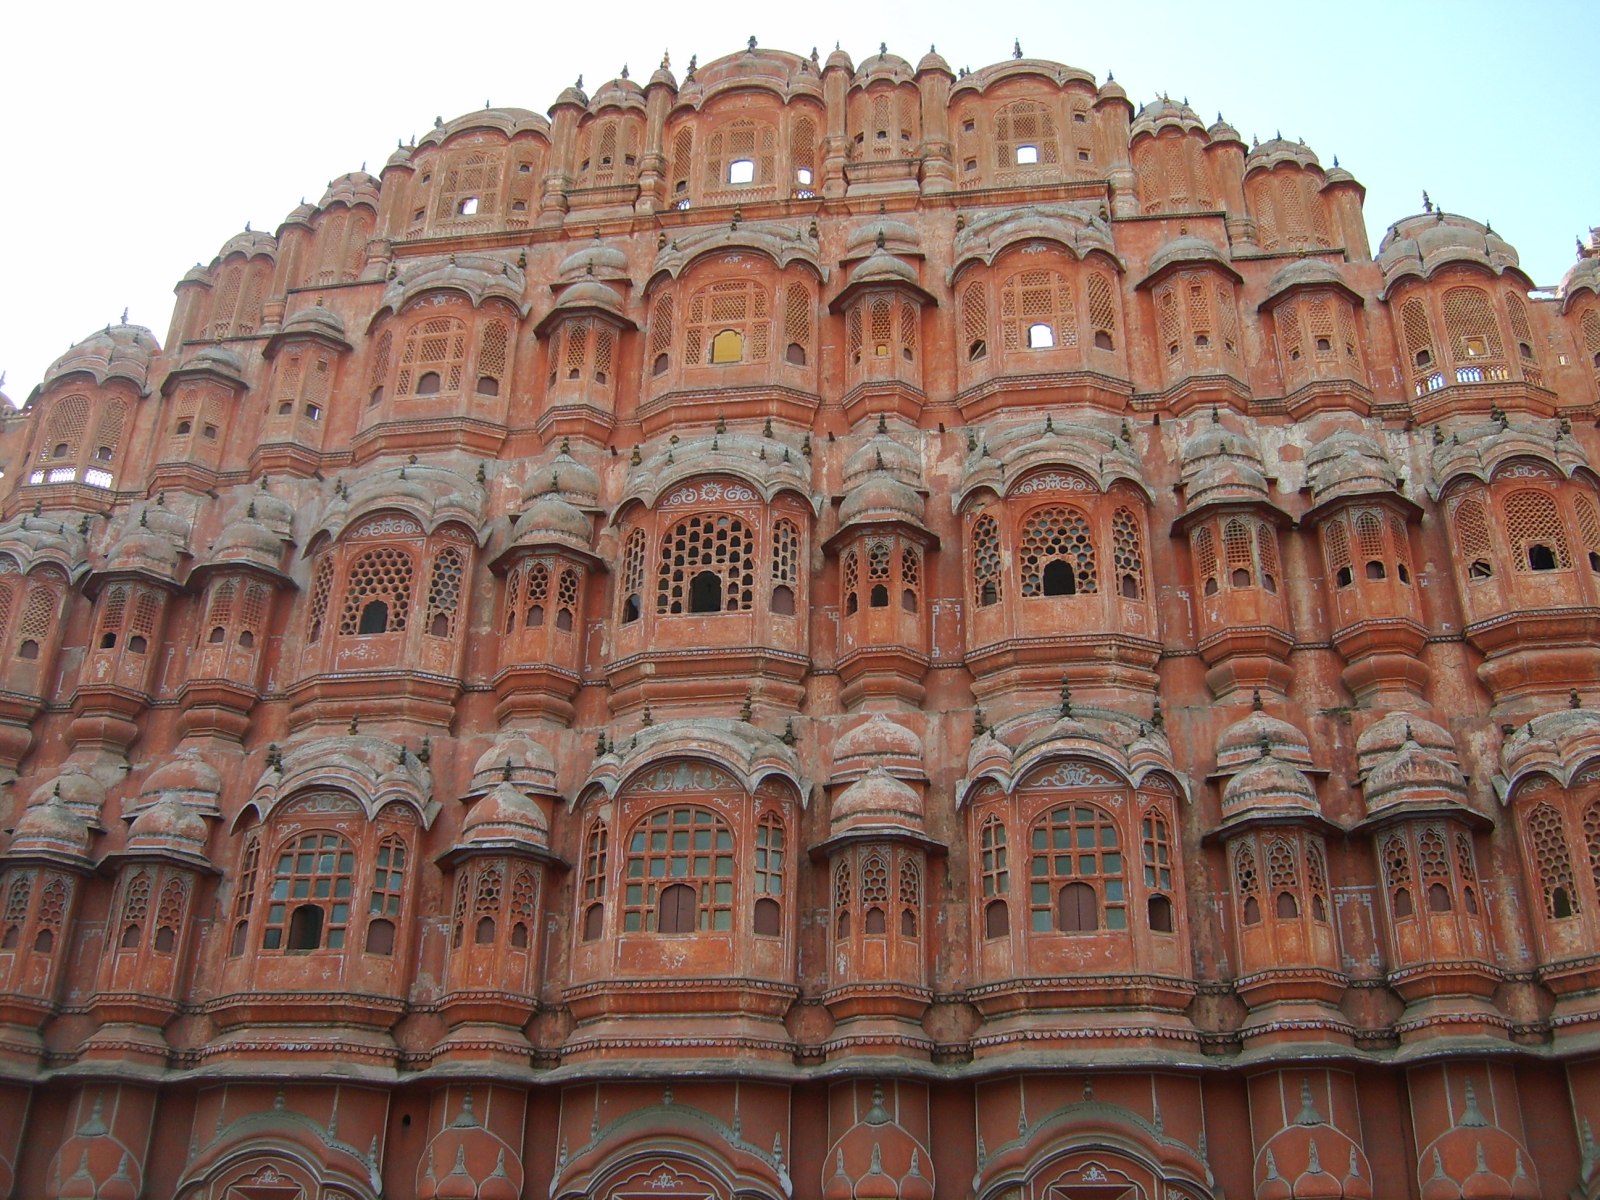 The pink city of Jaipur